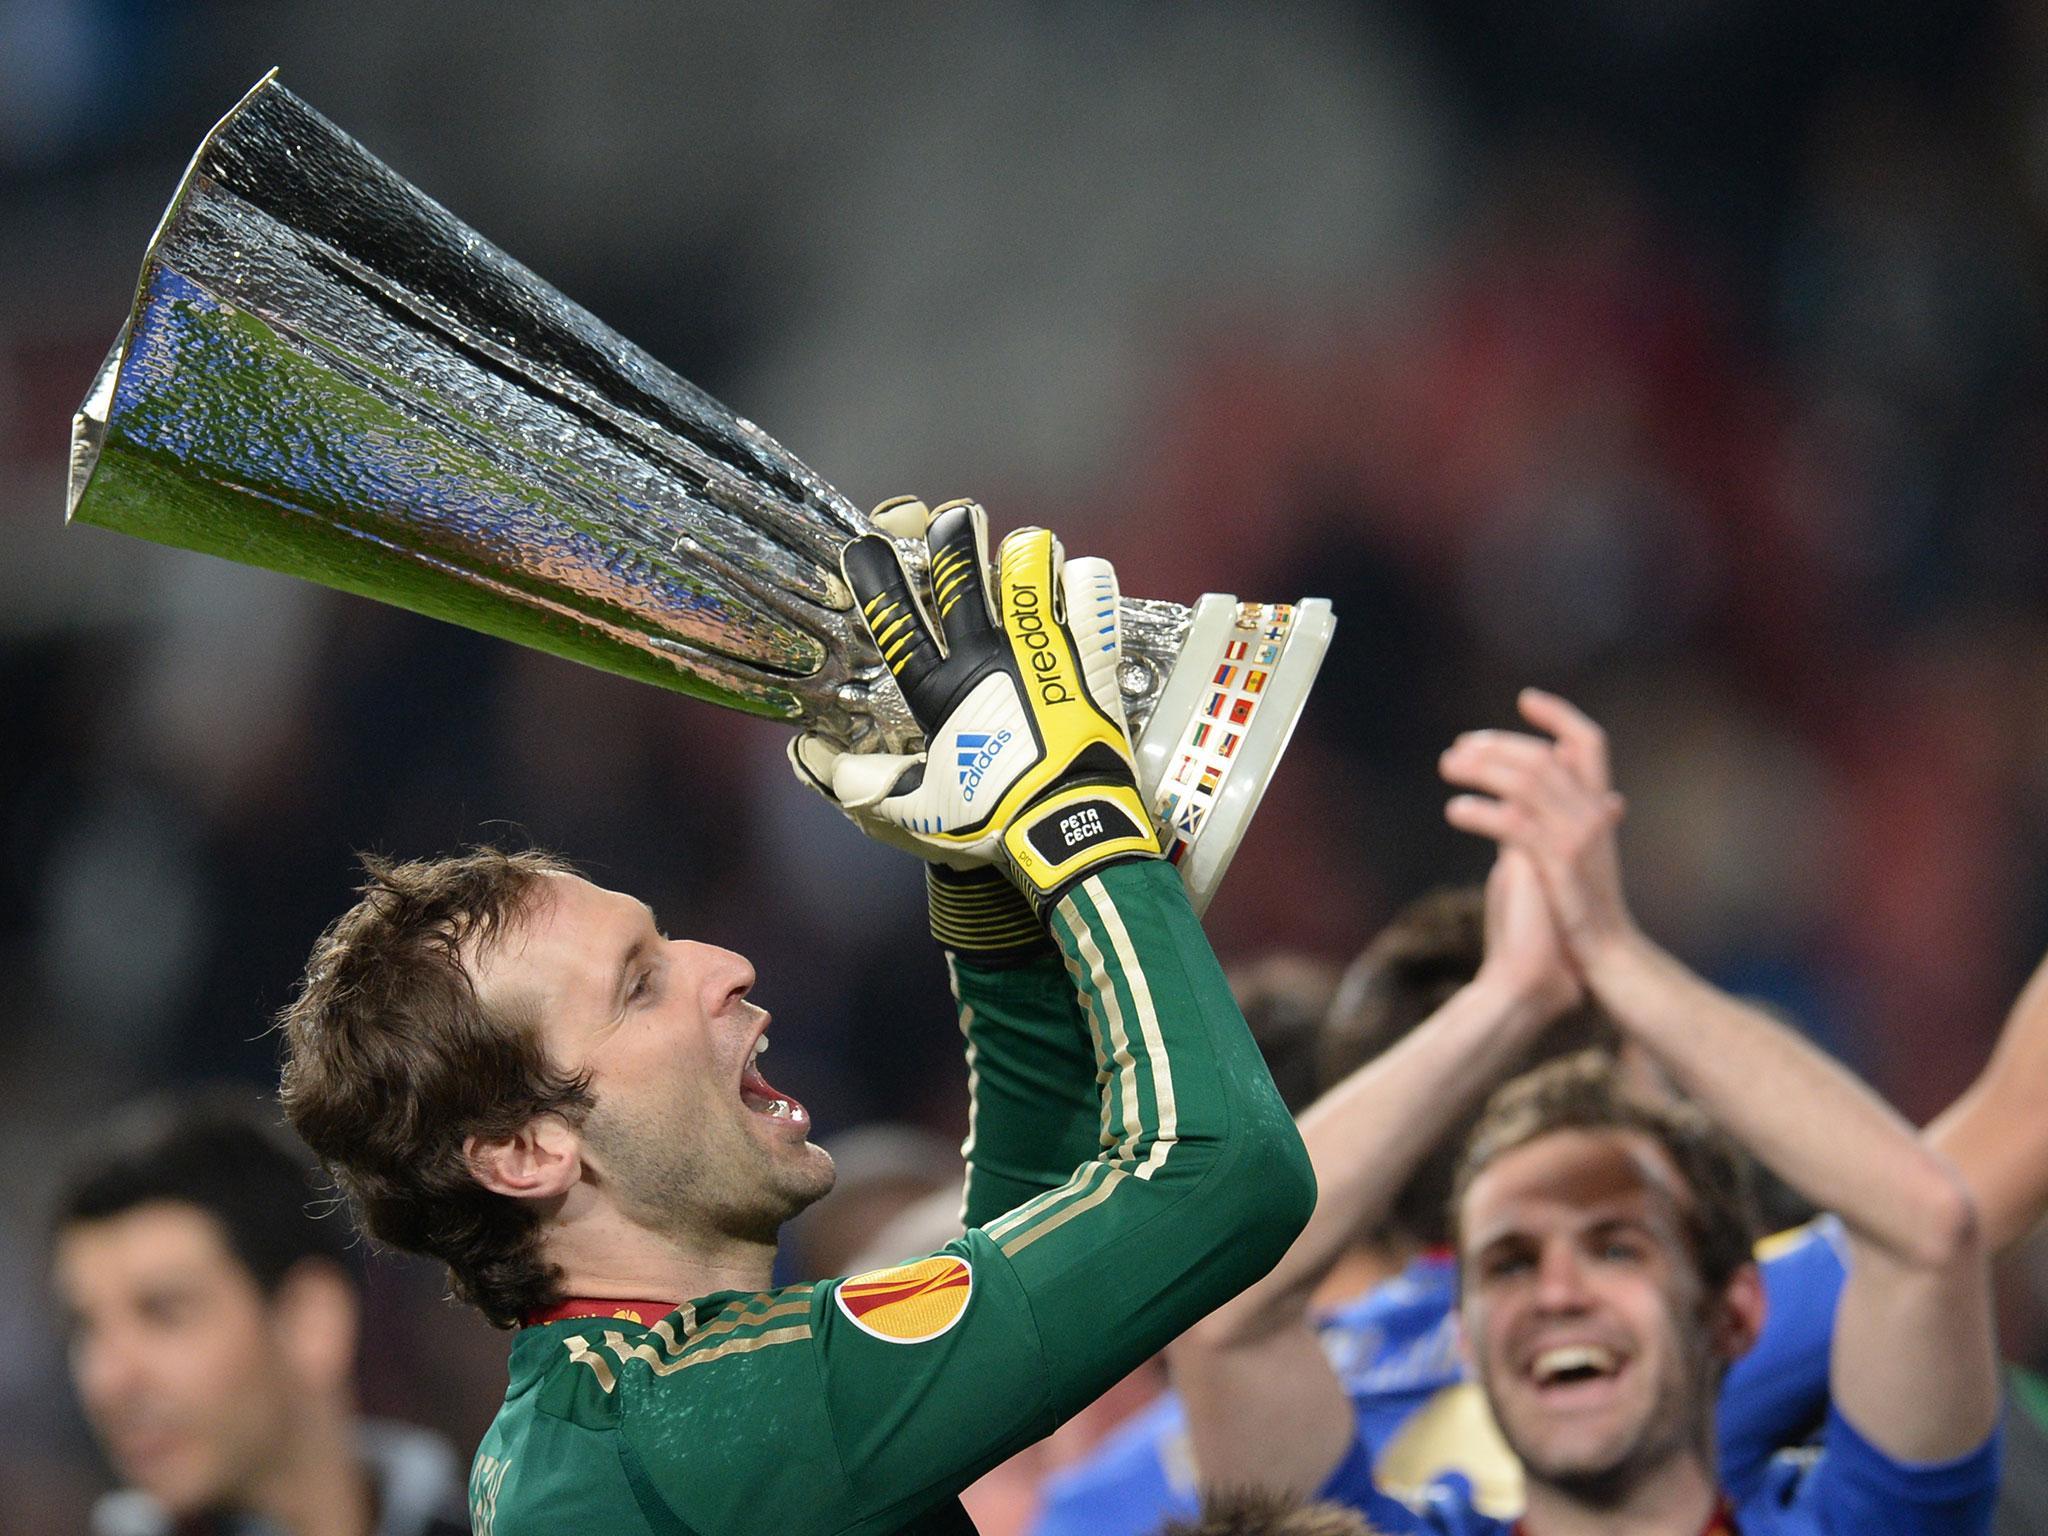 Petr Cech won the Europa League with Chelsea in 2013